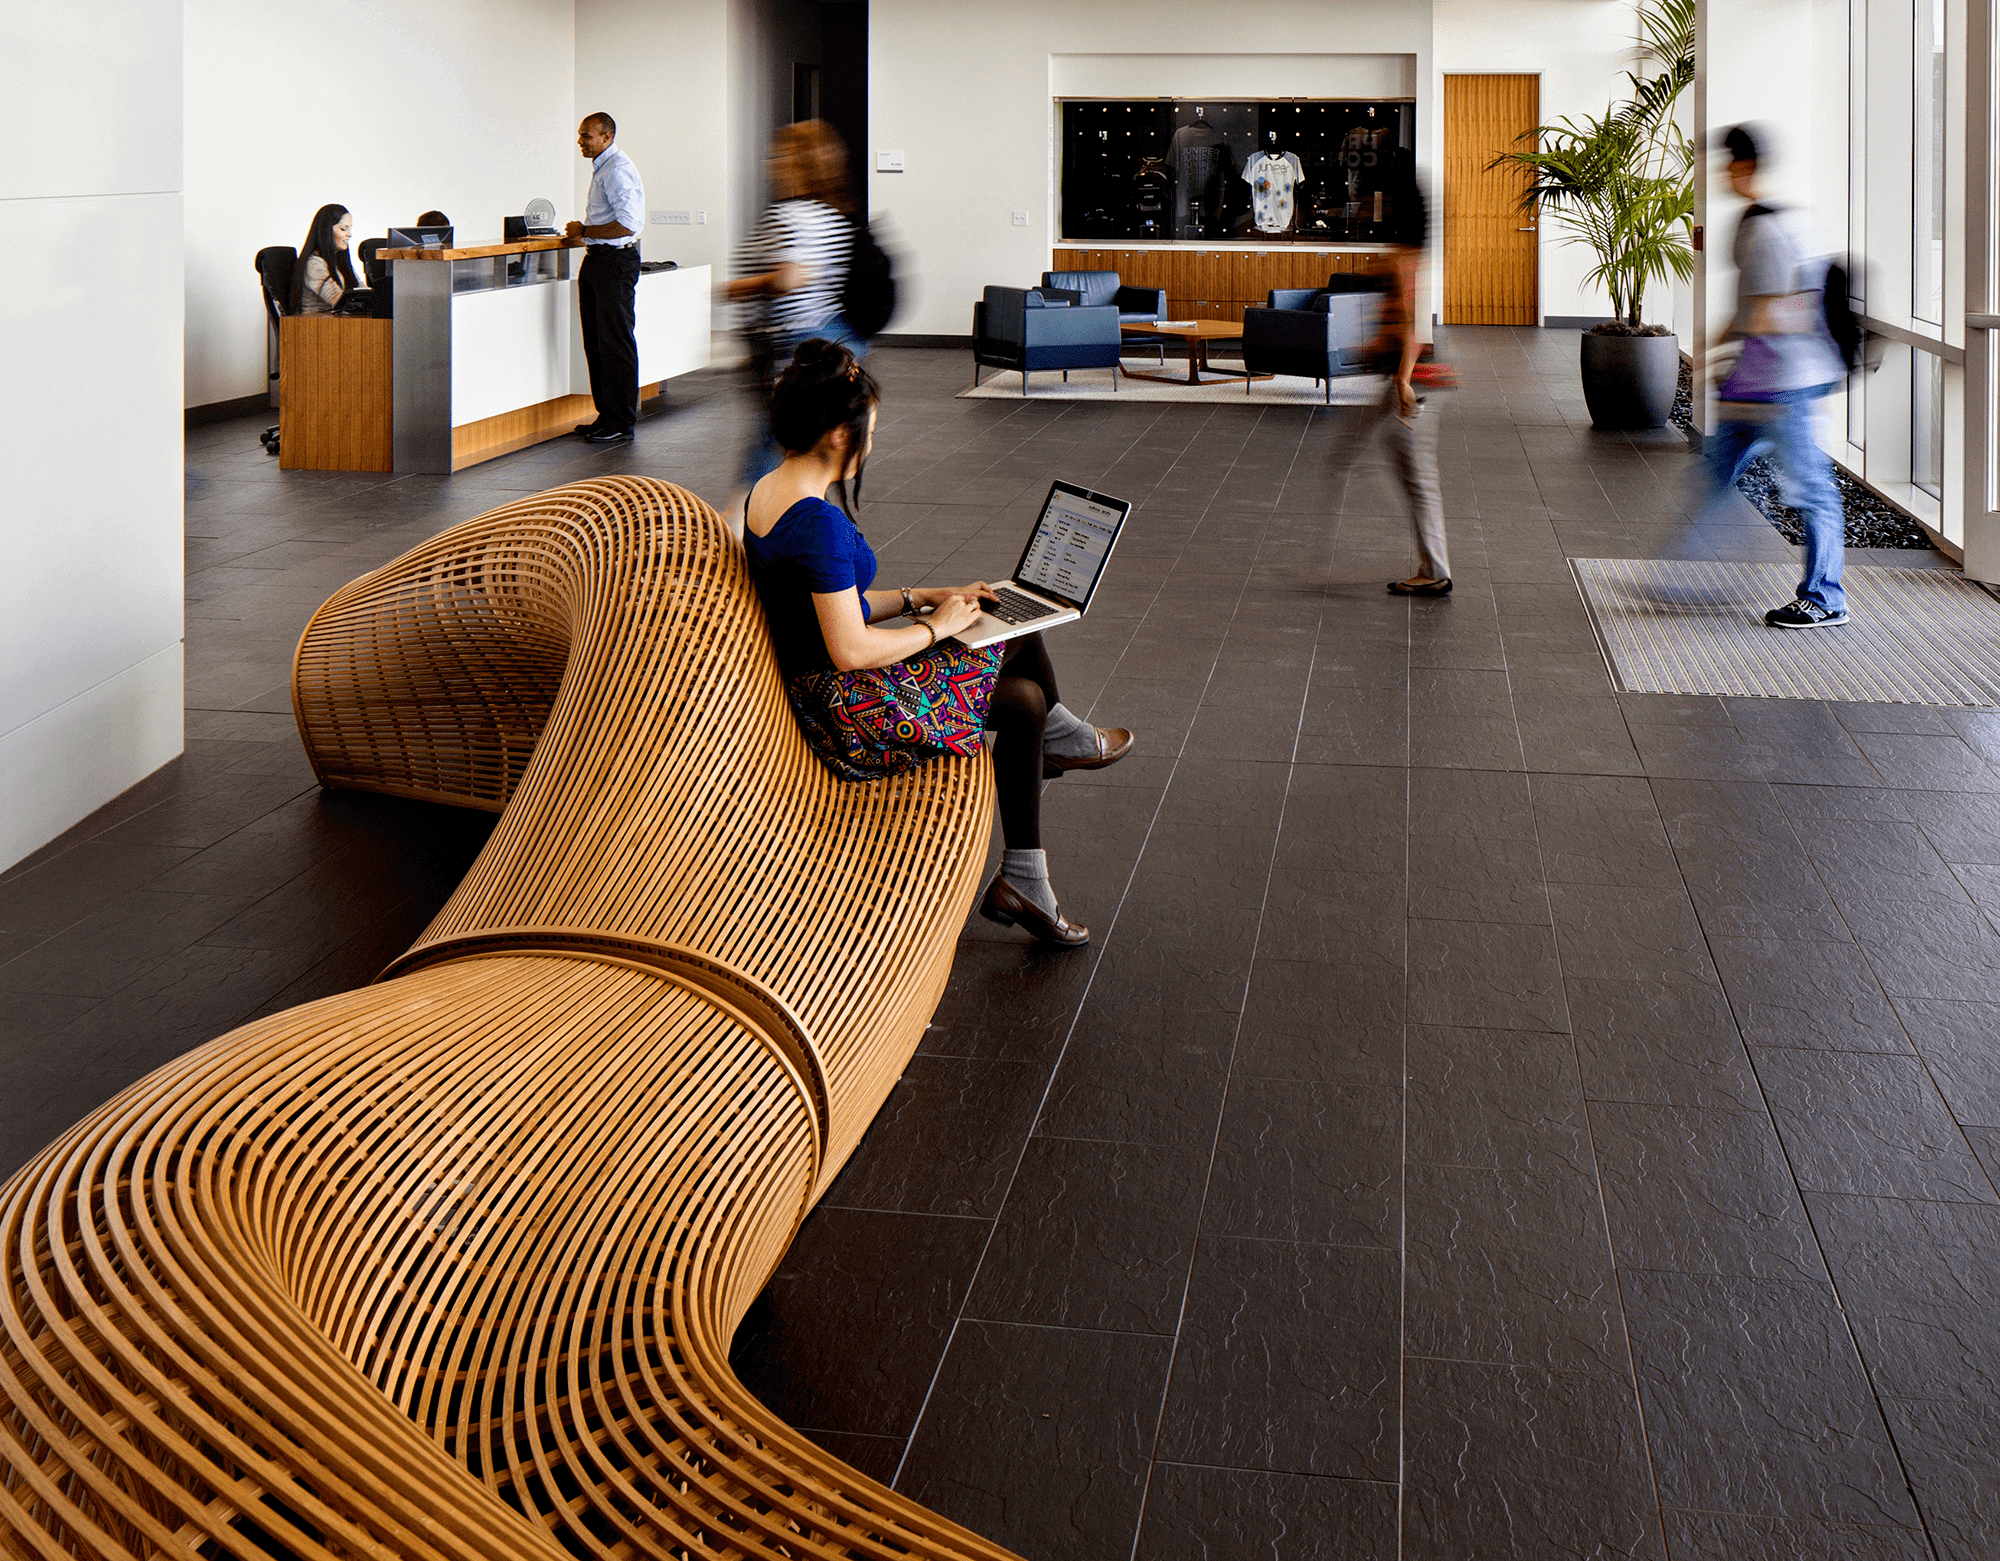 Juniper Networks Offices, One Space